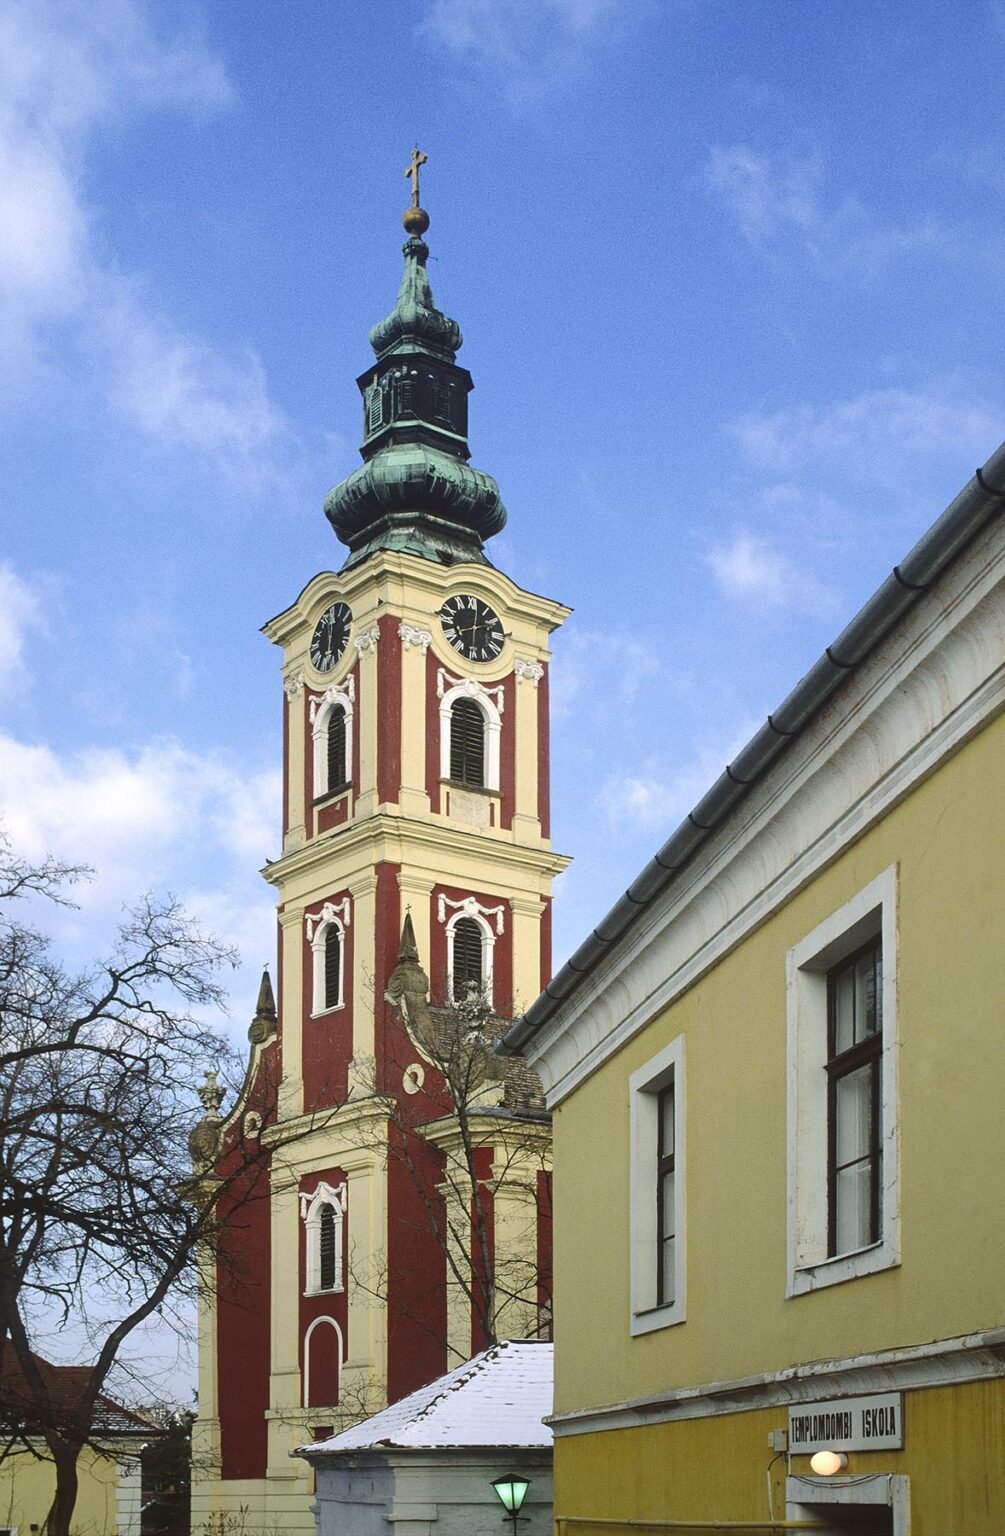 STEEPLE of a SERBIAN ORTHODOX CHURCH in SZENTENDRE on the DANUBE BEND outside BUDAPEST - HUNGARY